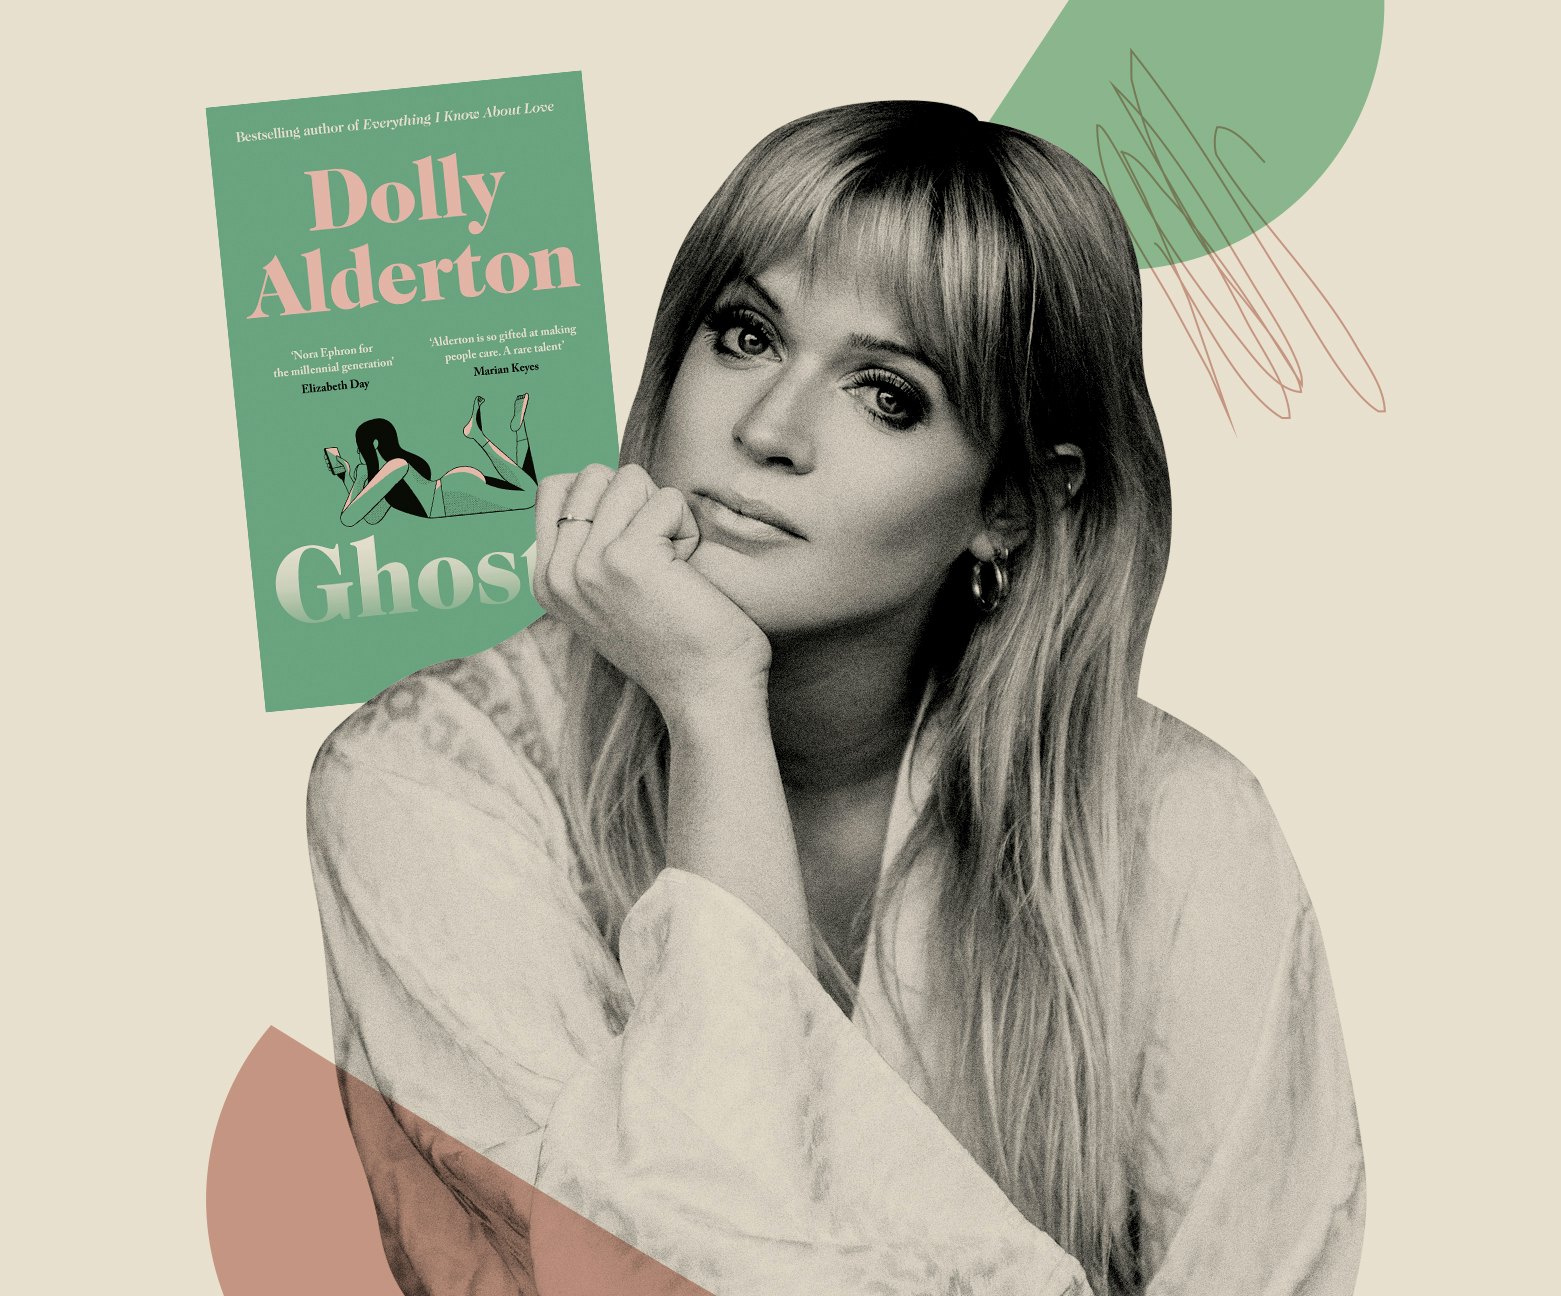 ghosts by dolly alderton